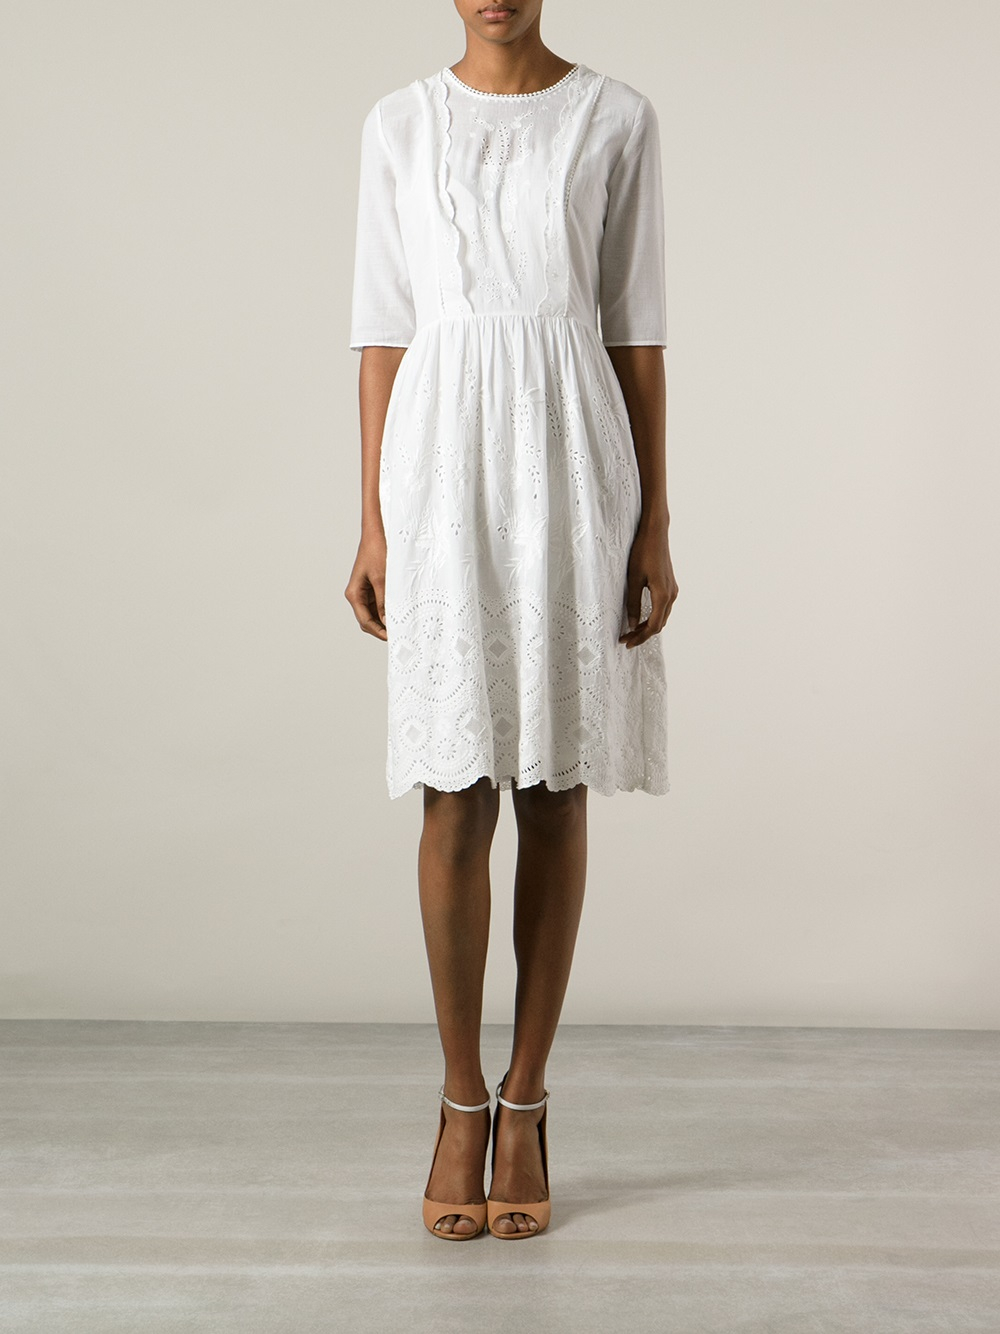 Lyst - Vanessa Bruno Athé Broderie Anglaise Dress in White